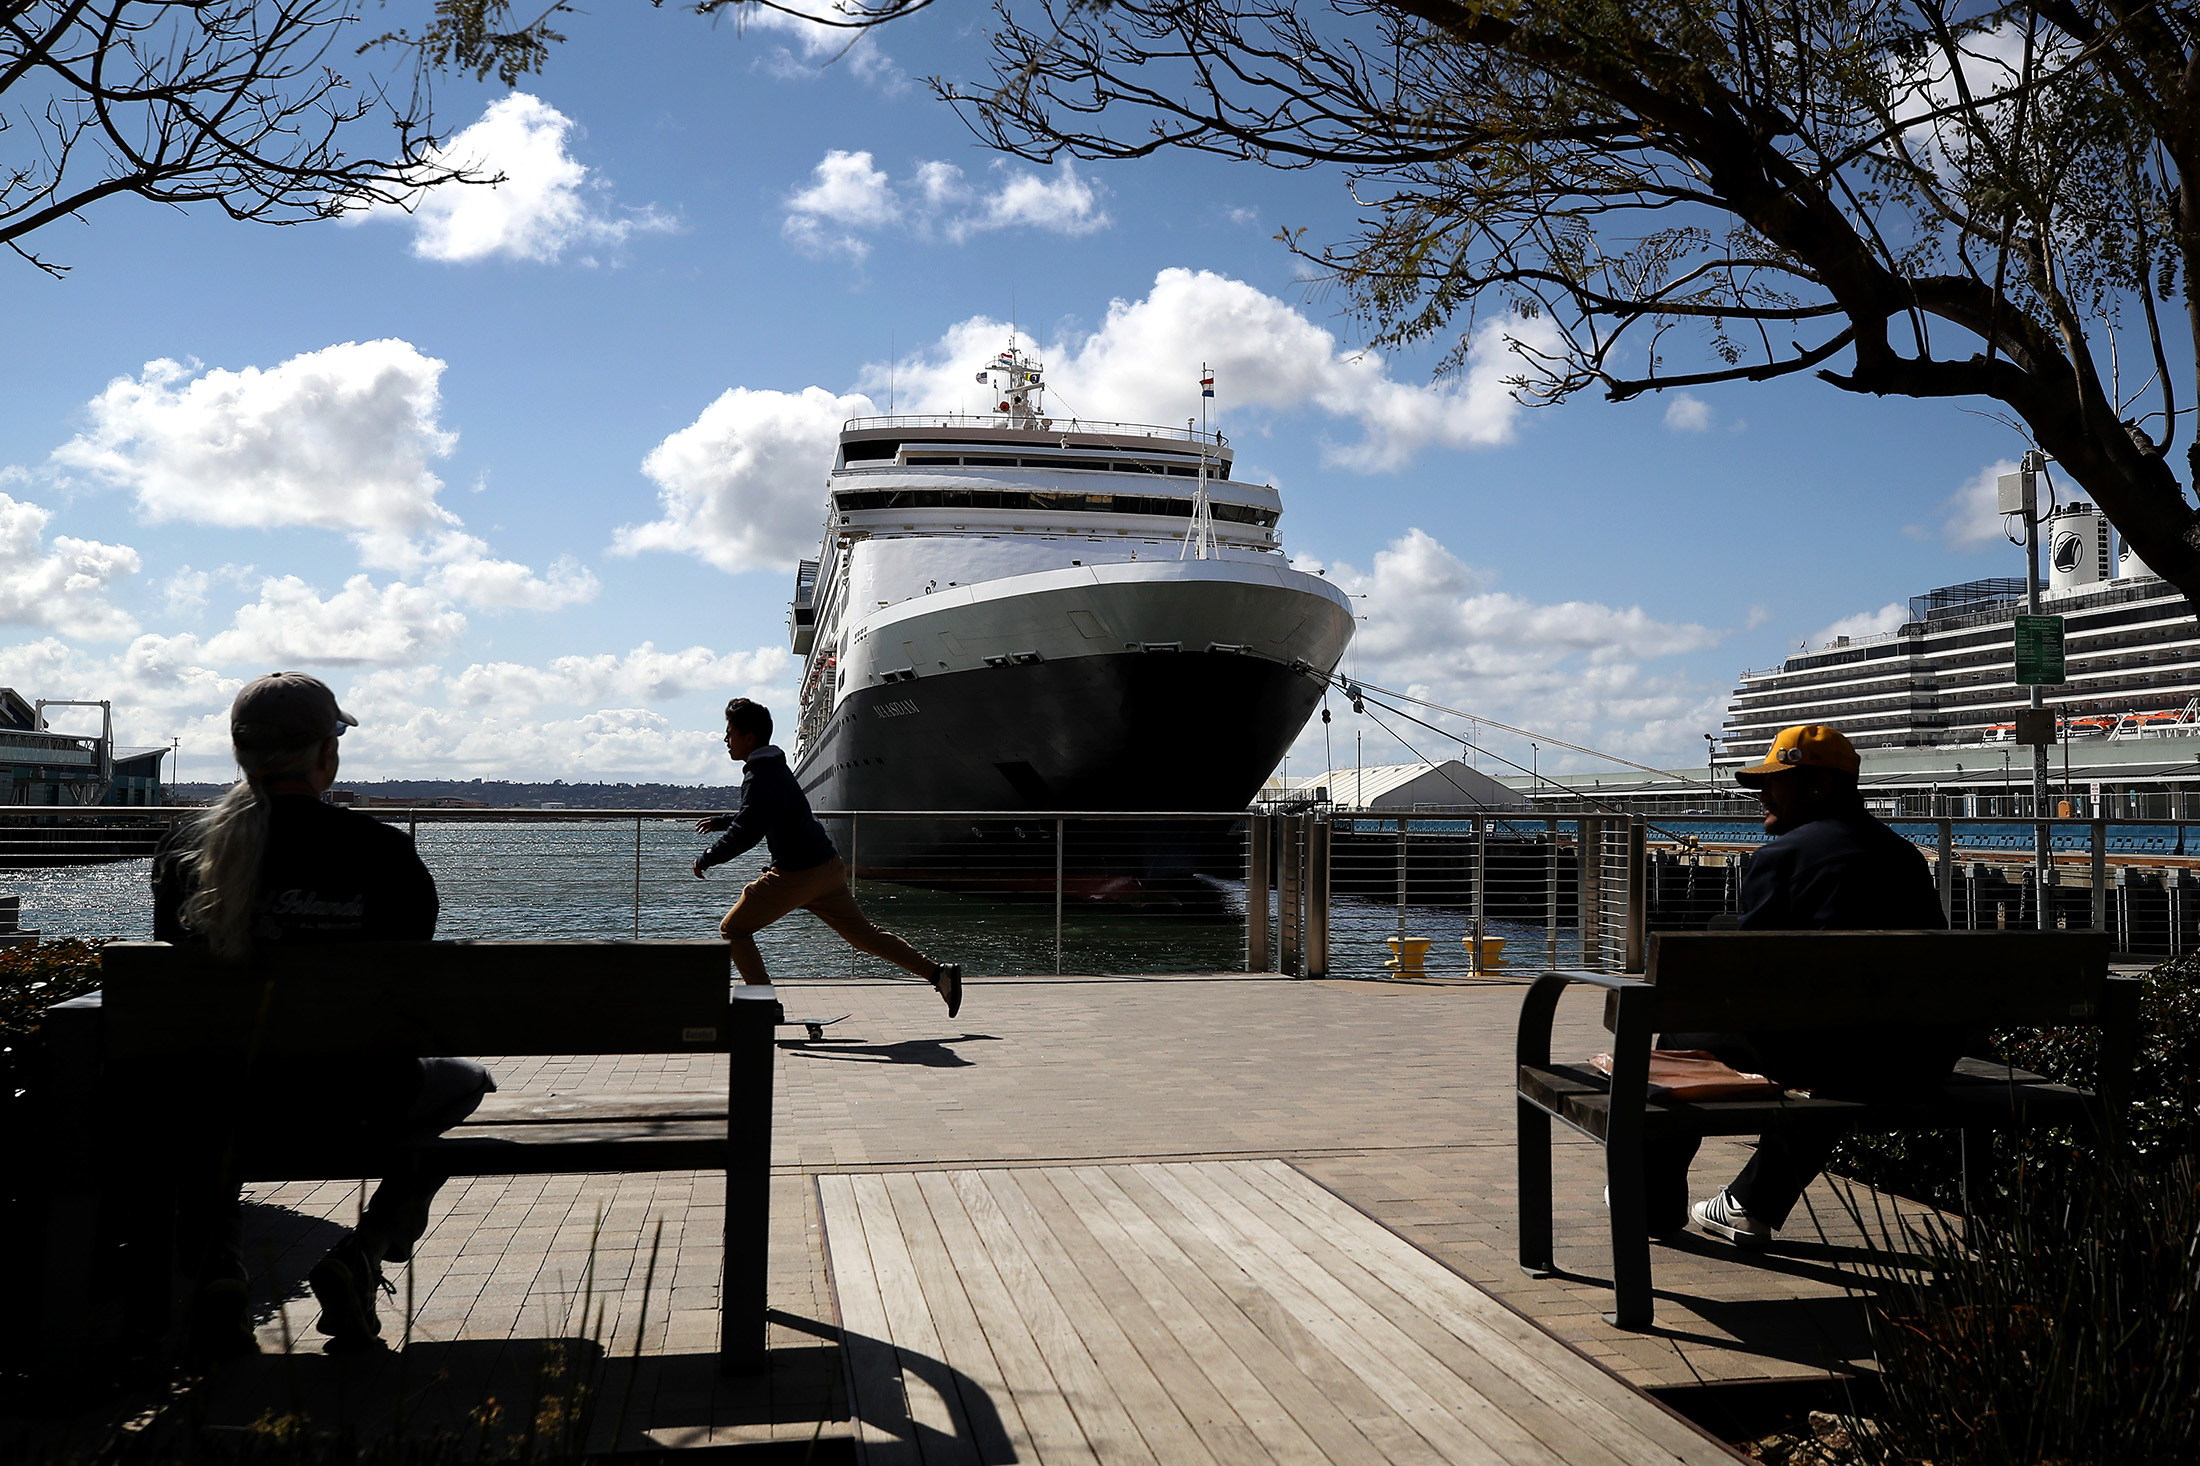 Too Big to Sail? Cruise Ships Face Scrutiny - The New York Times